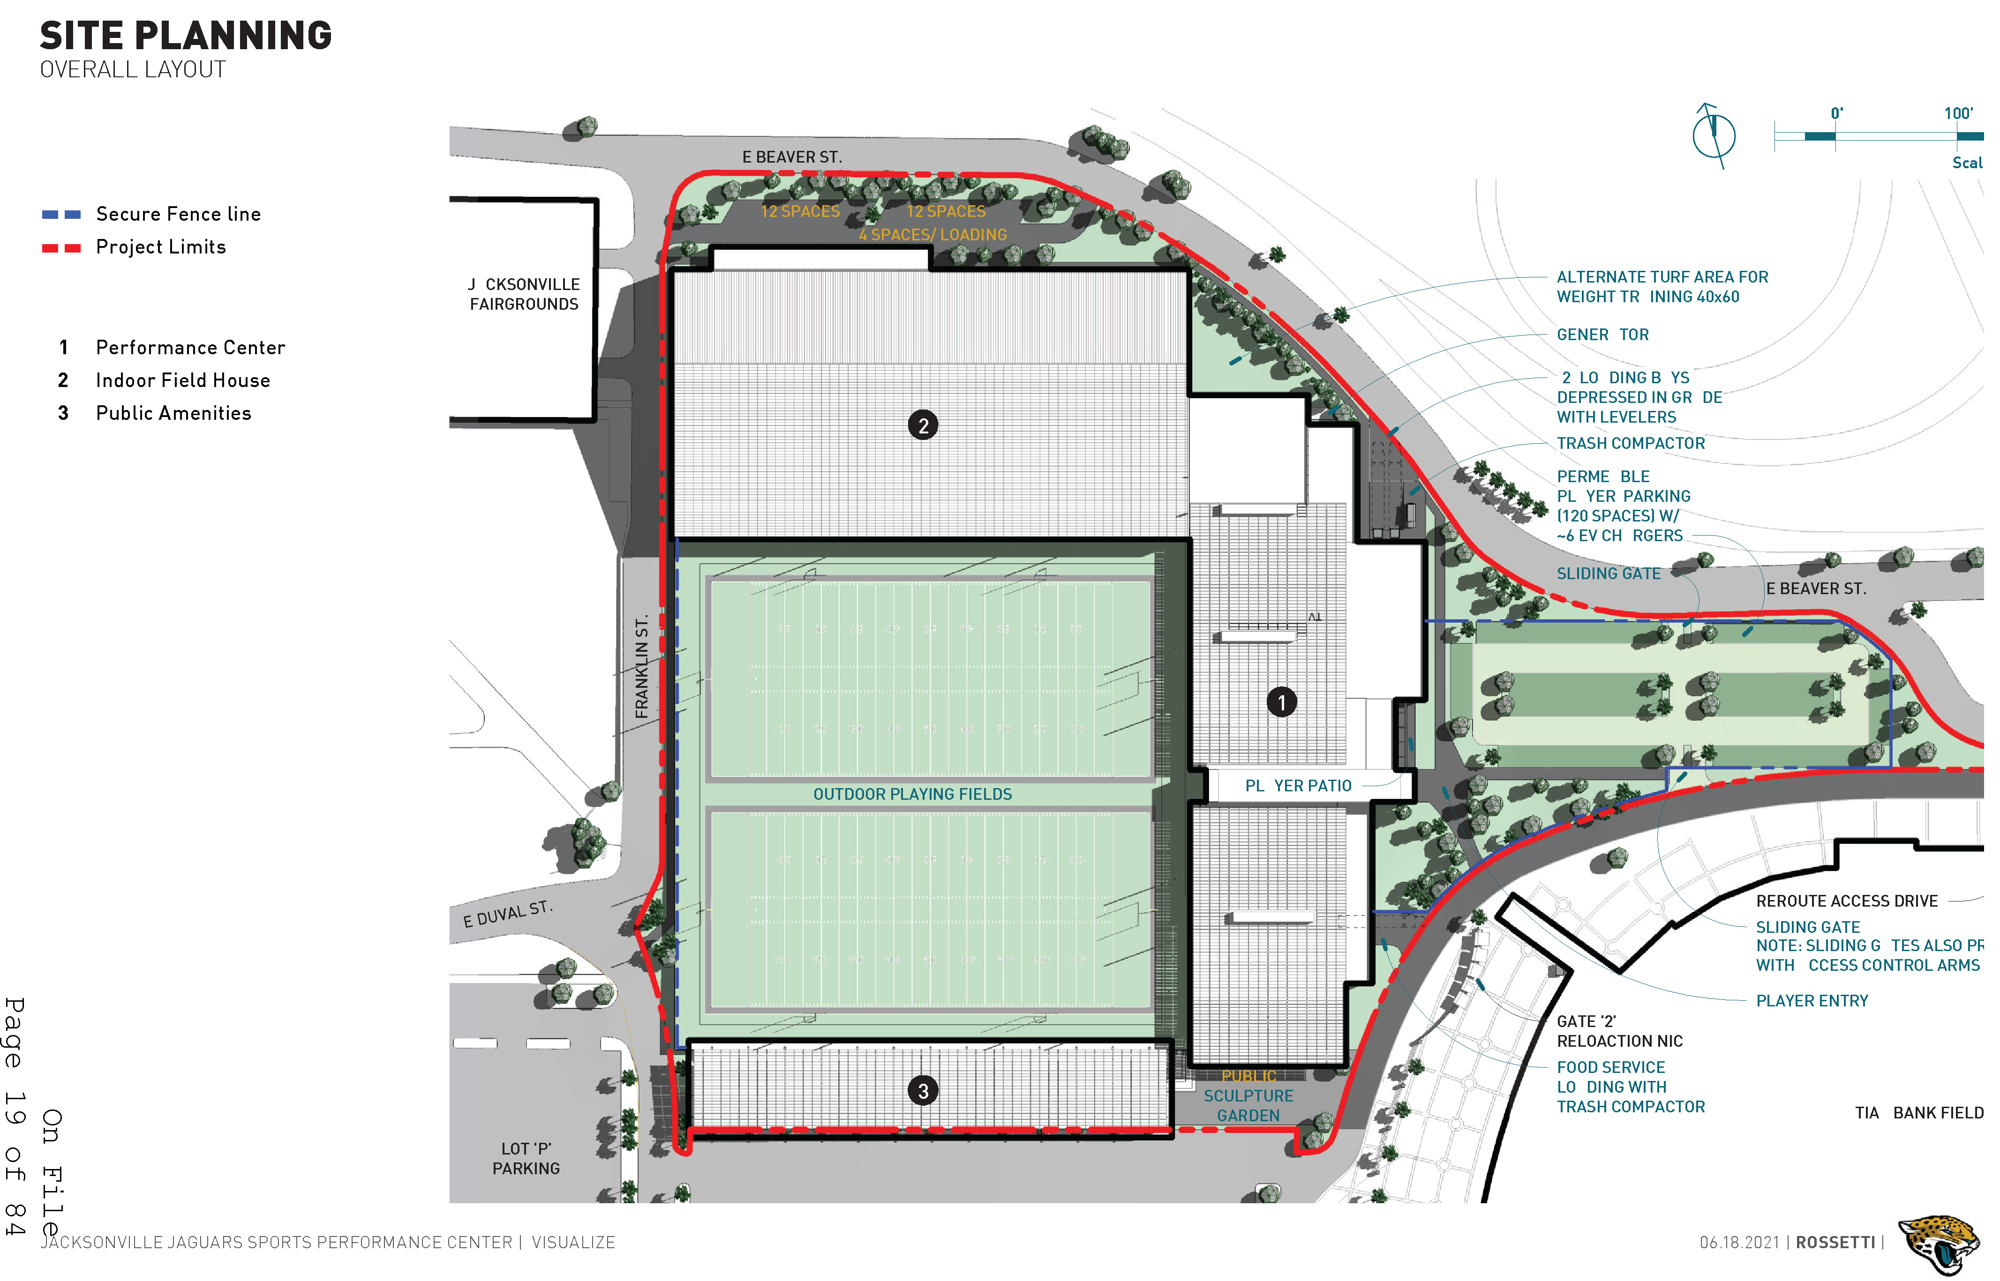 The site planning map for the football performance center.